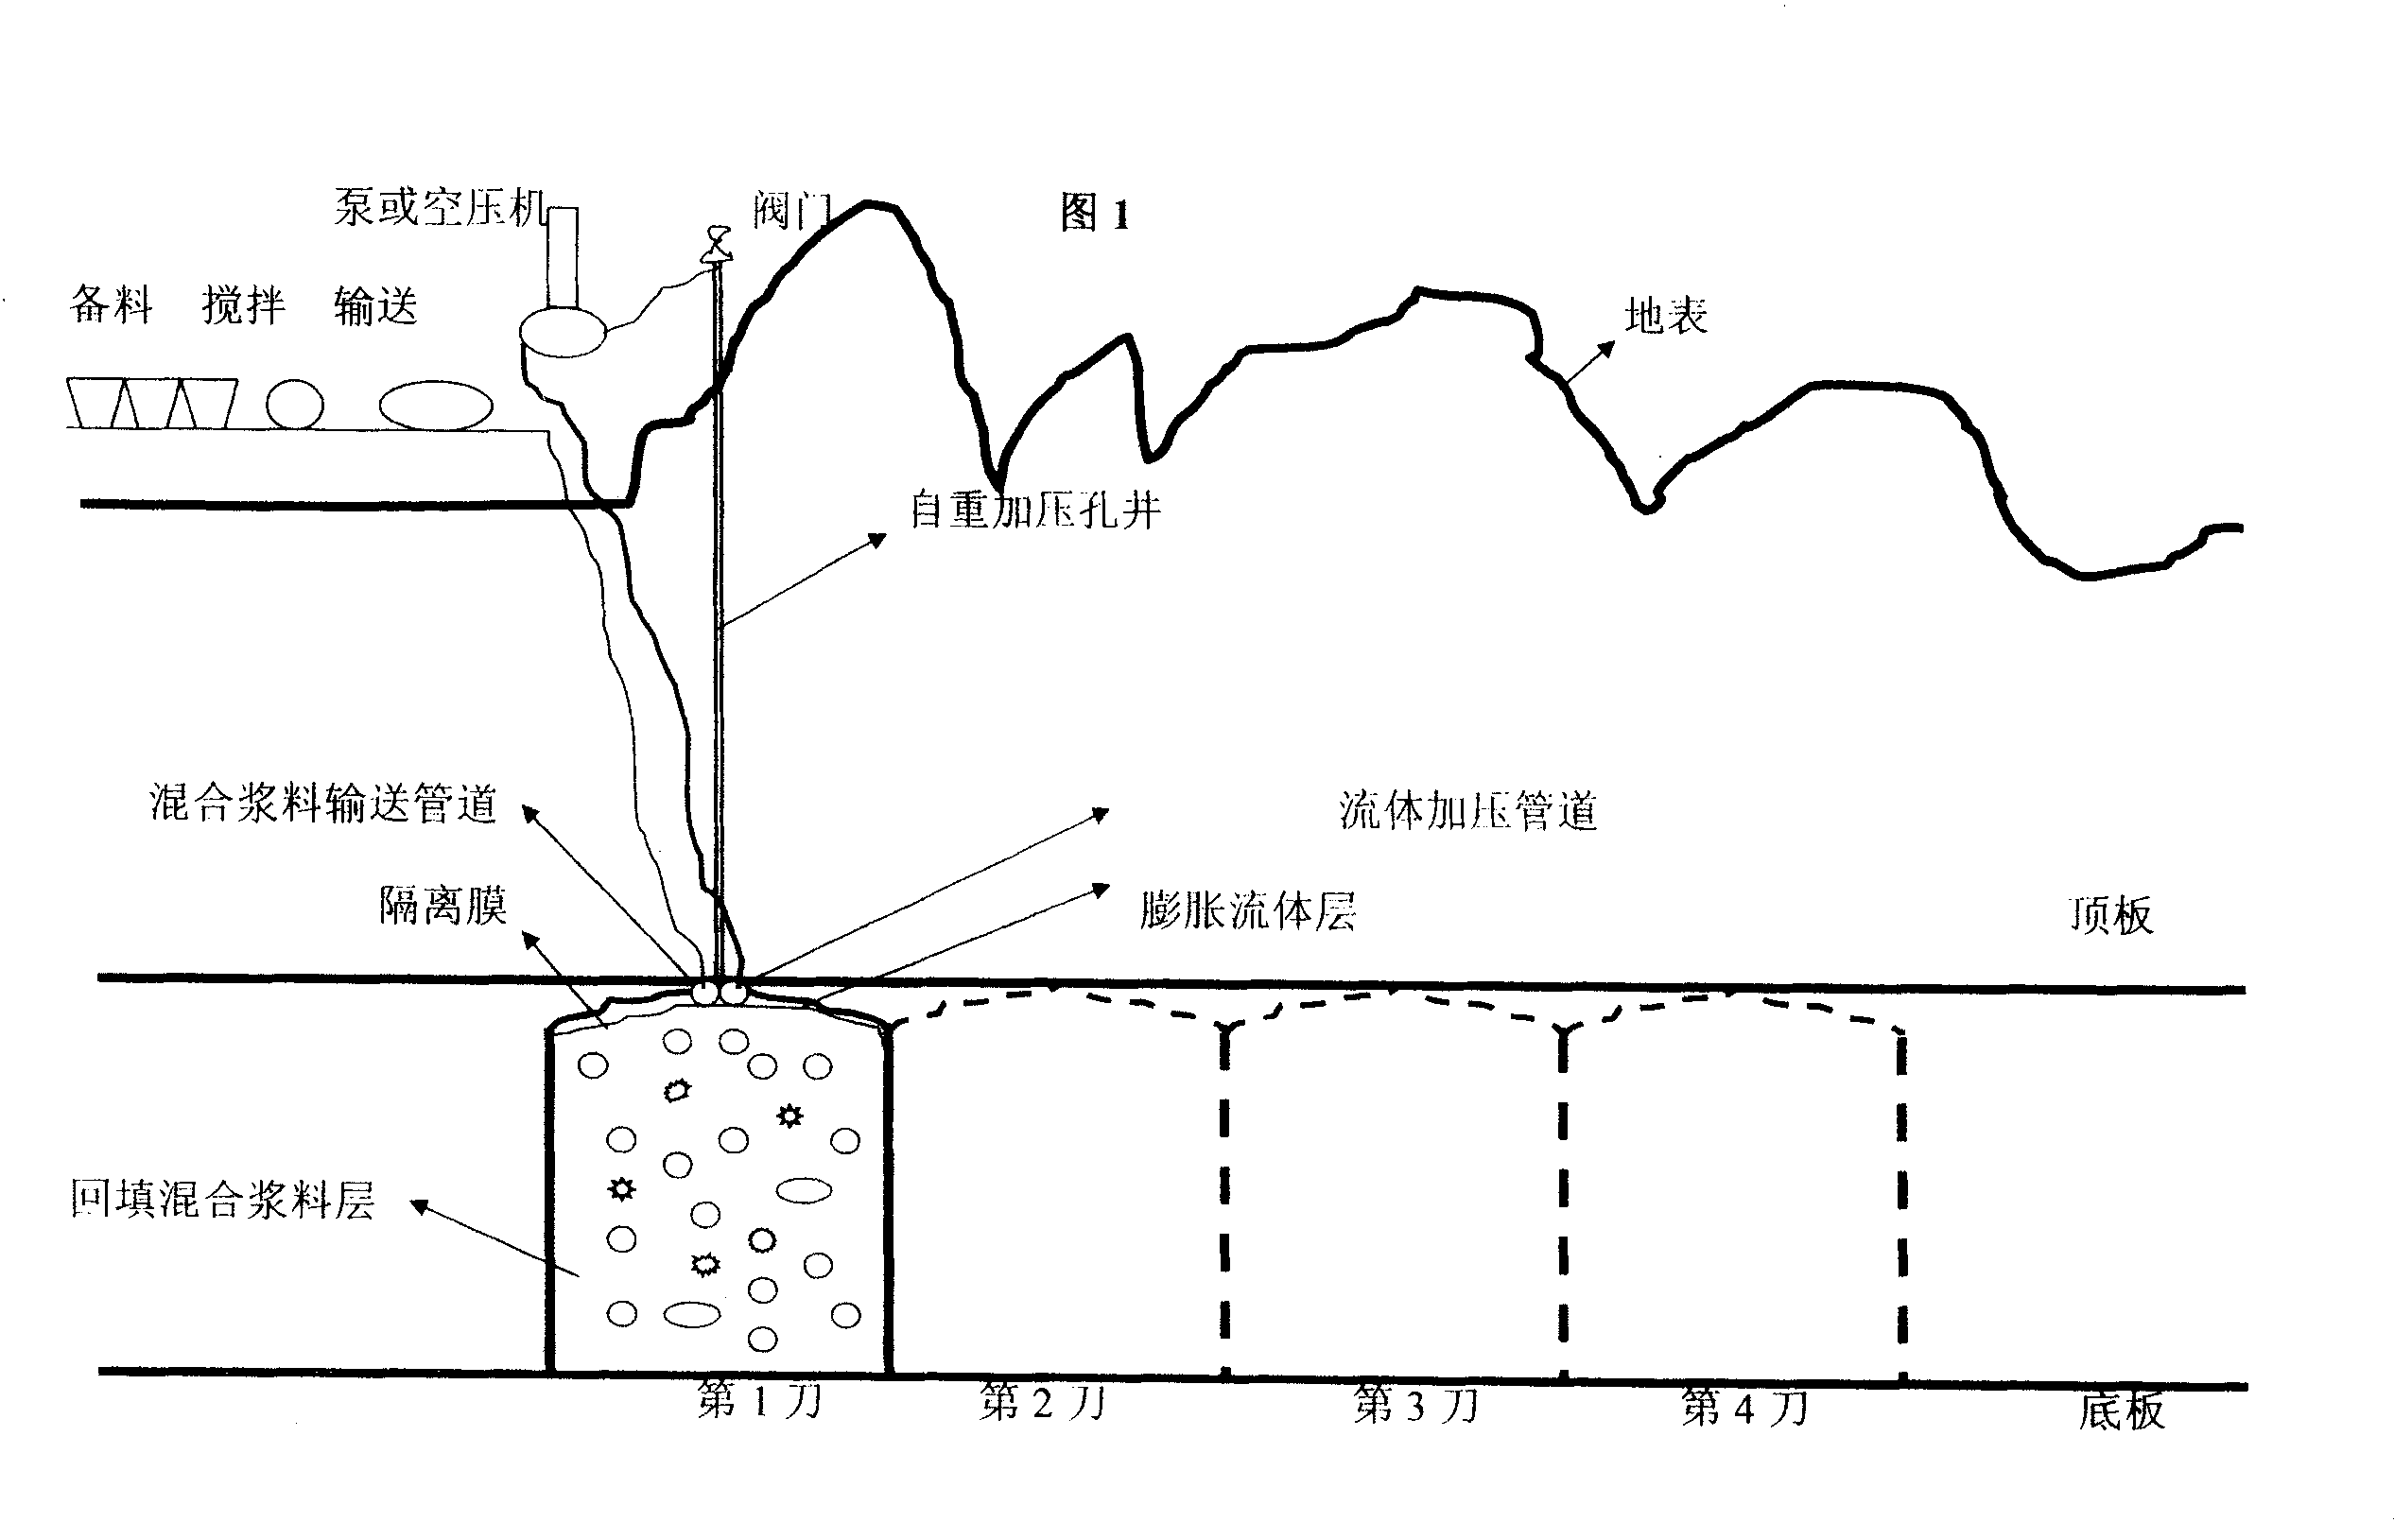 Method for backfilling goaf and supporting roof